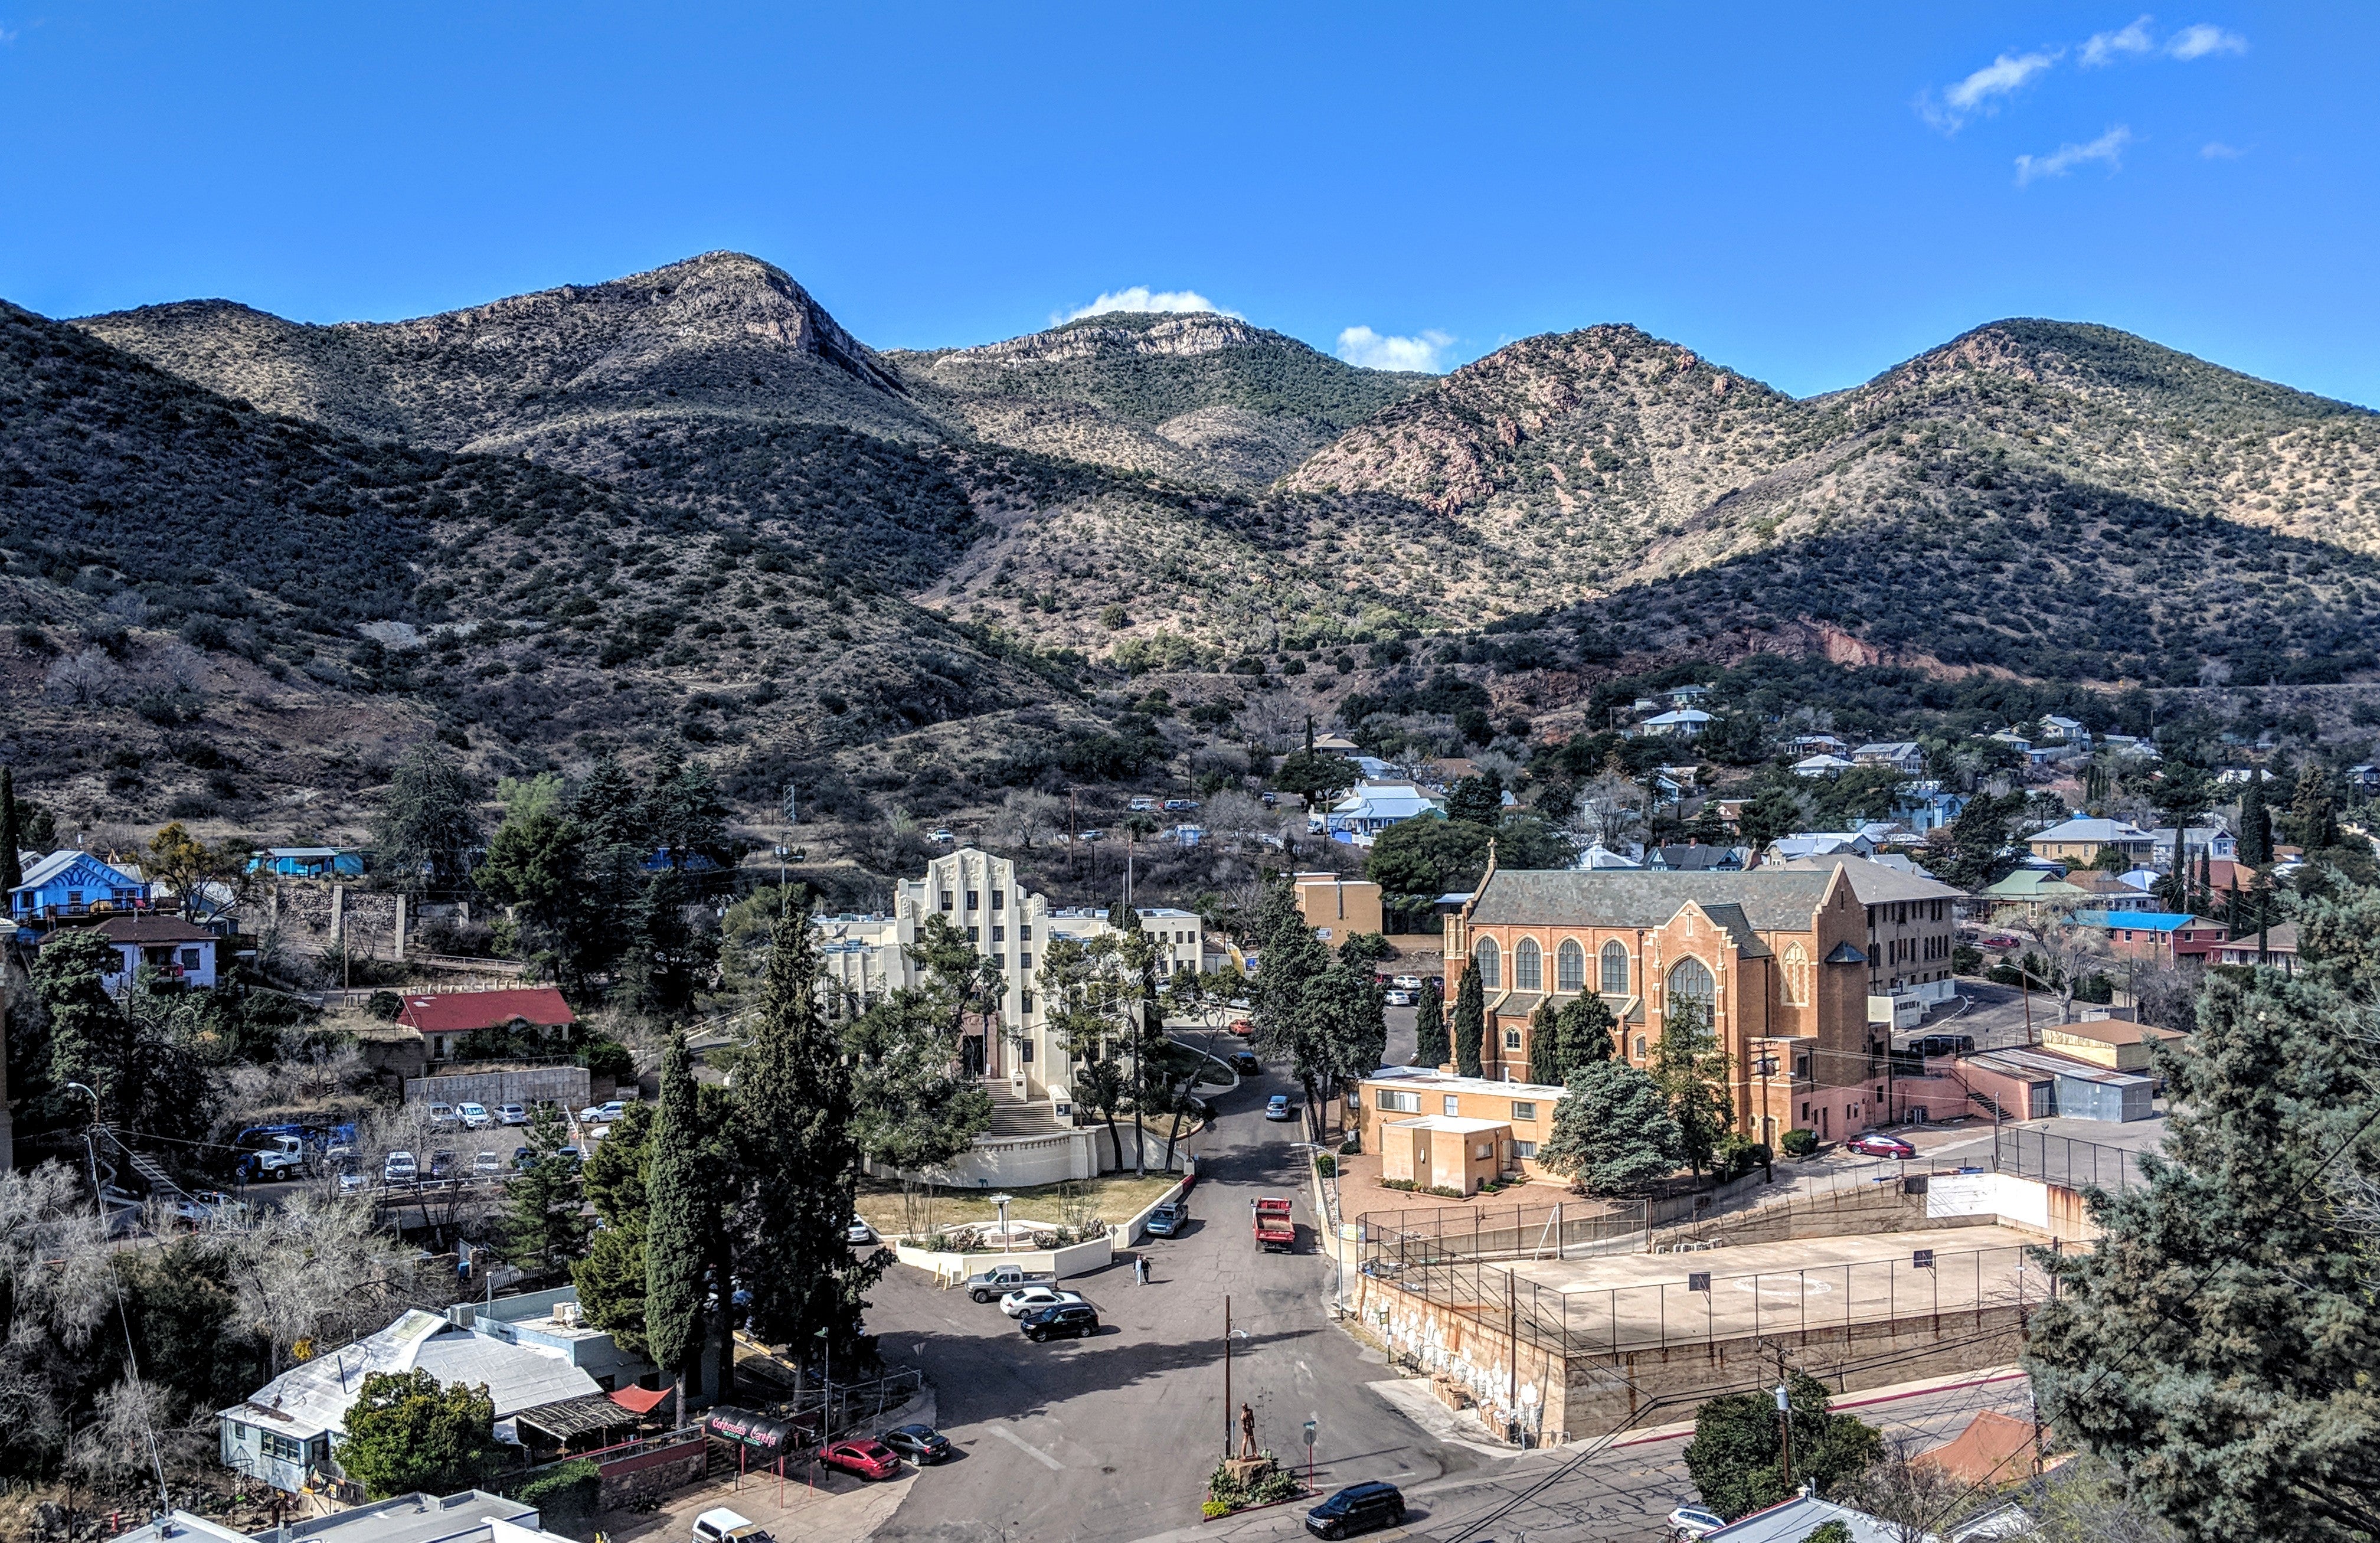 View from above Bisbee.